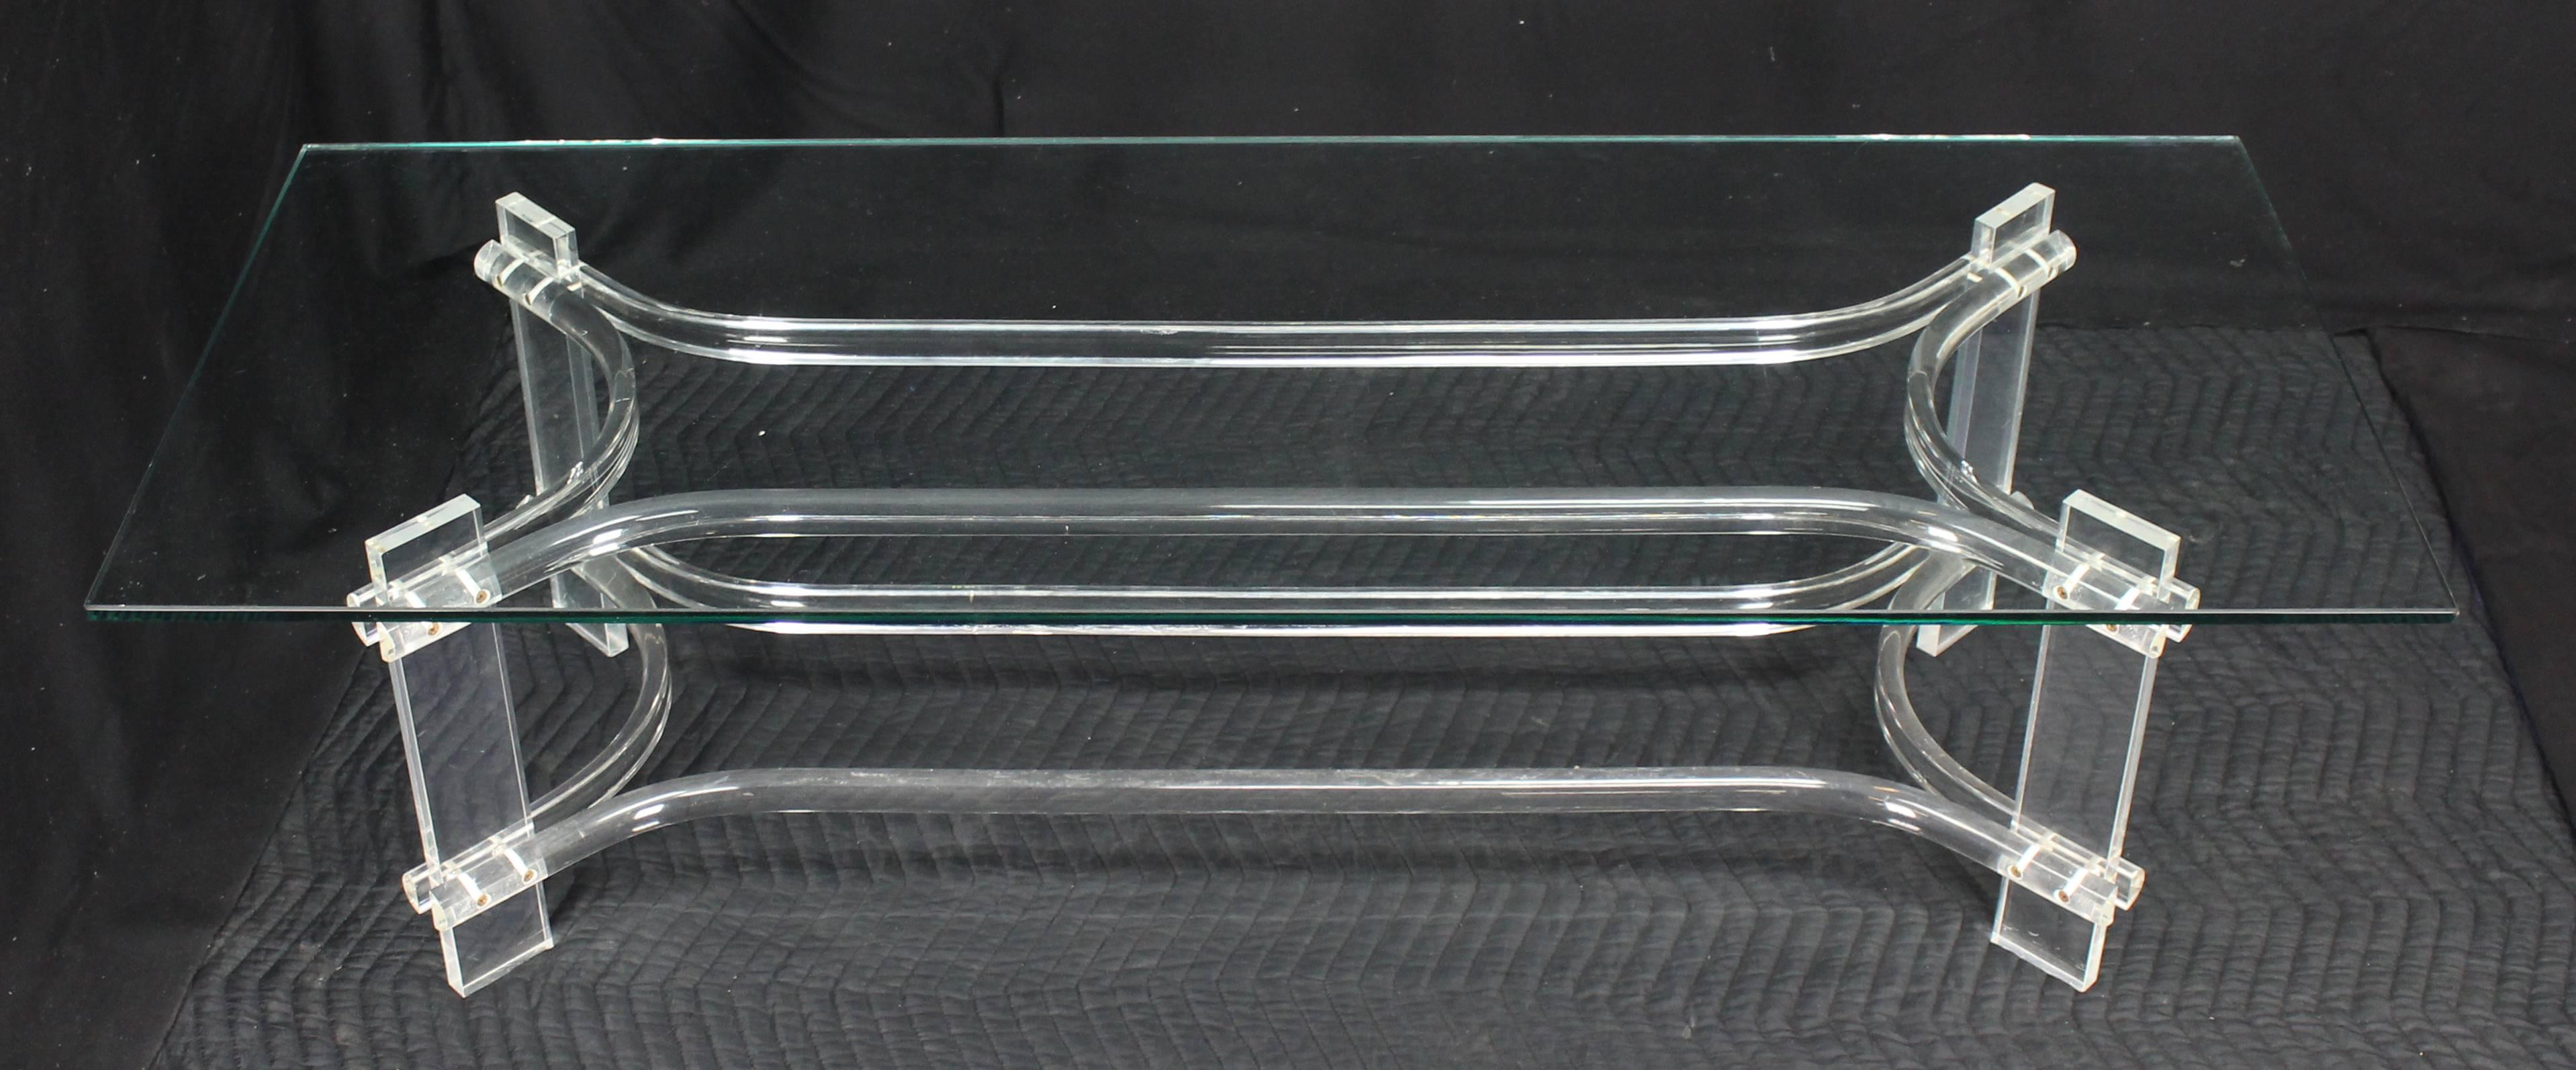 rectangle coffee table with glass top